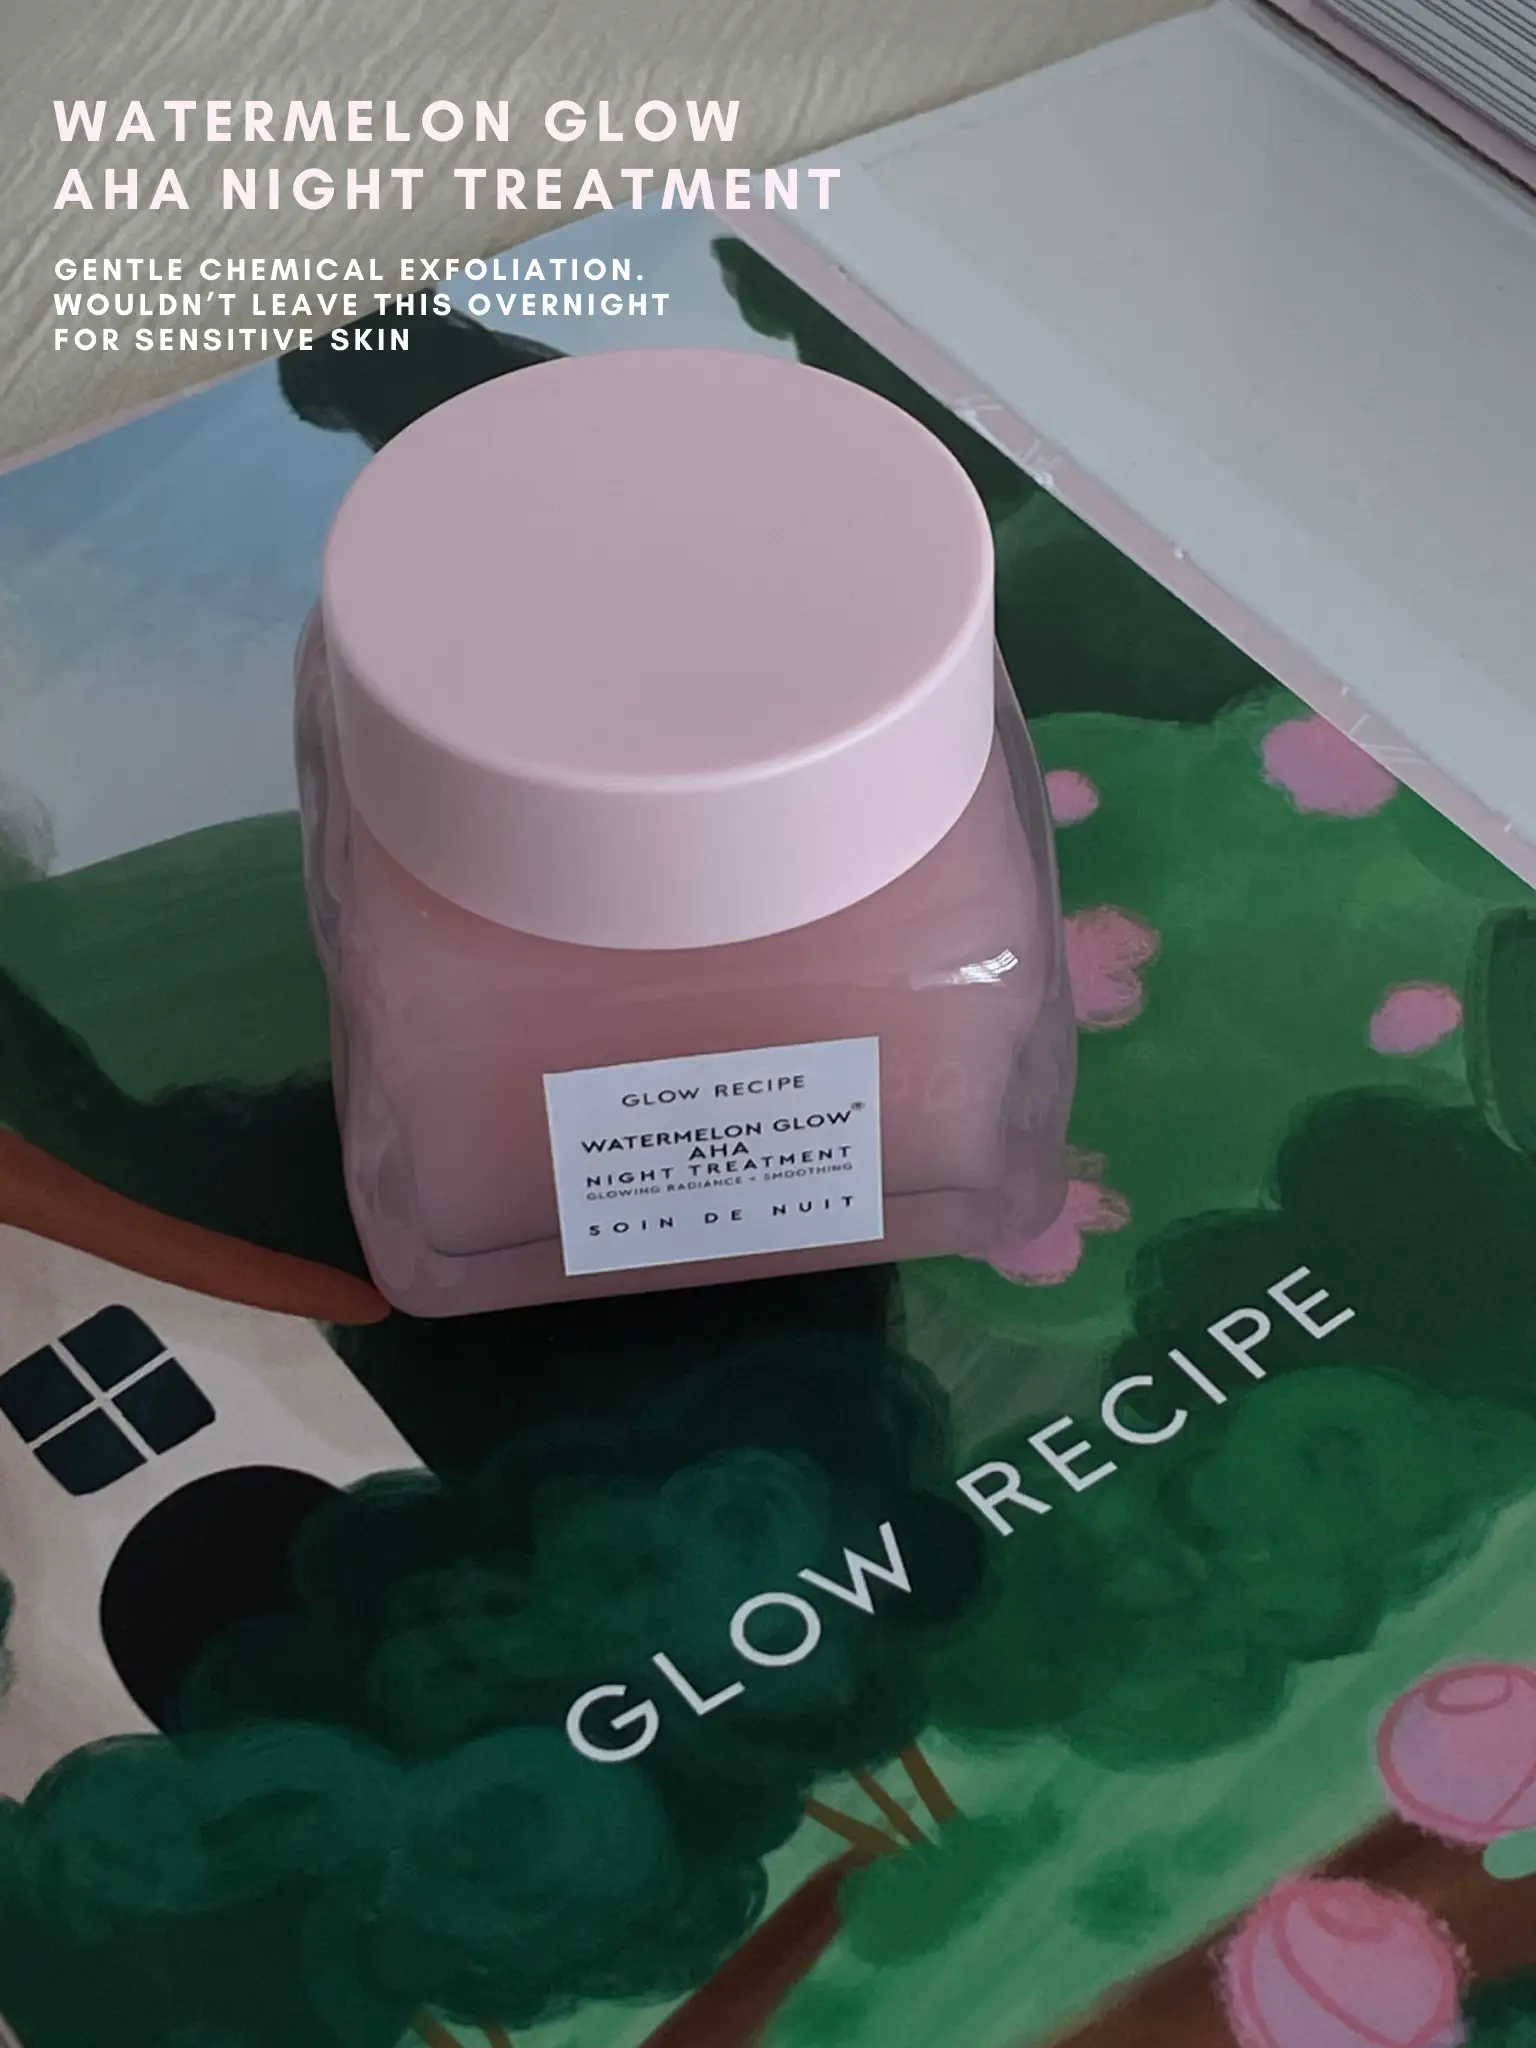 does GLOW RECIPE truly live up to its hype? 's images(1)